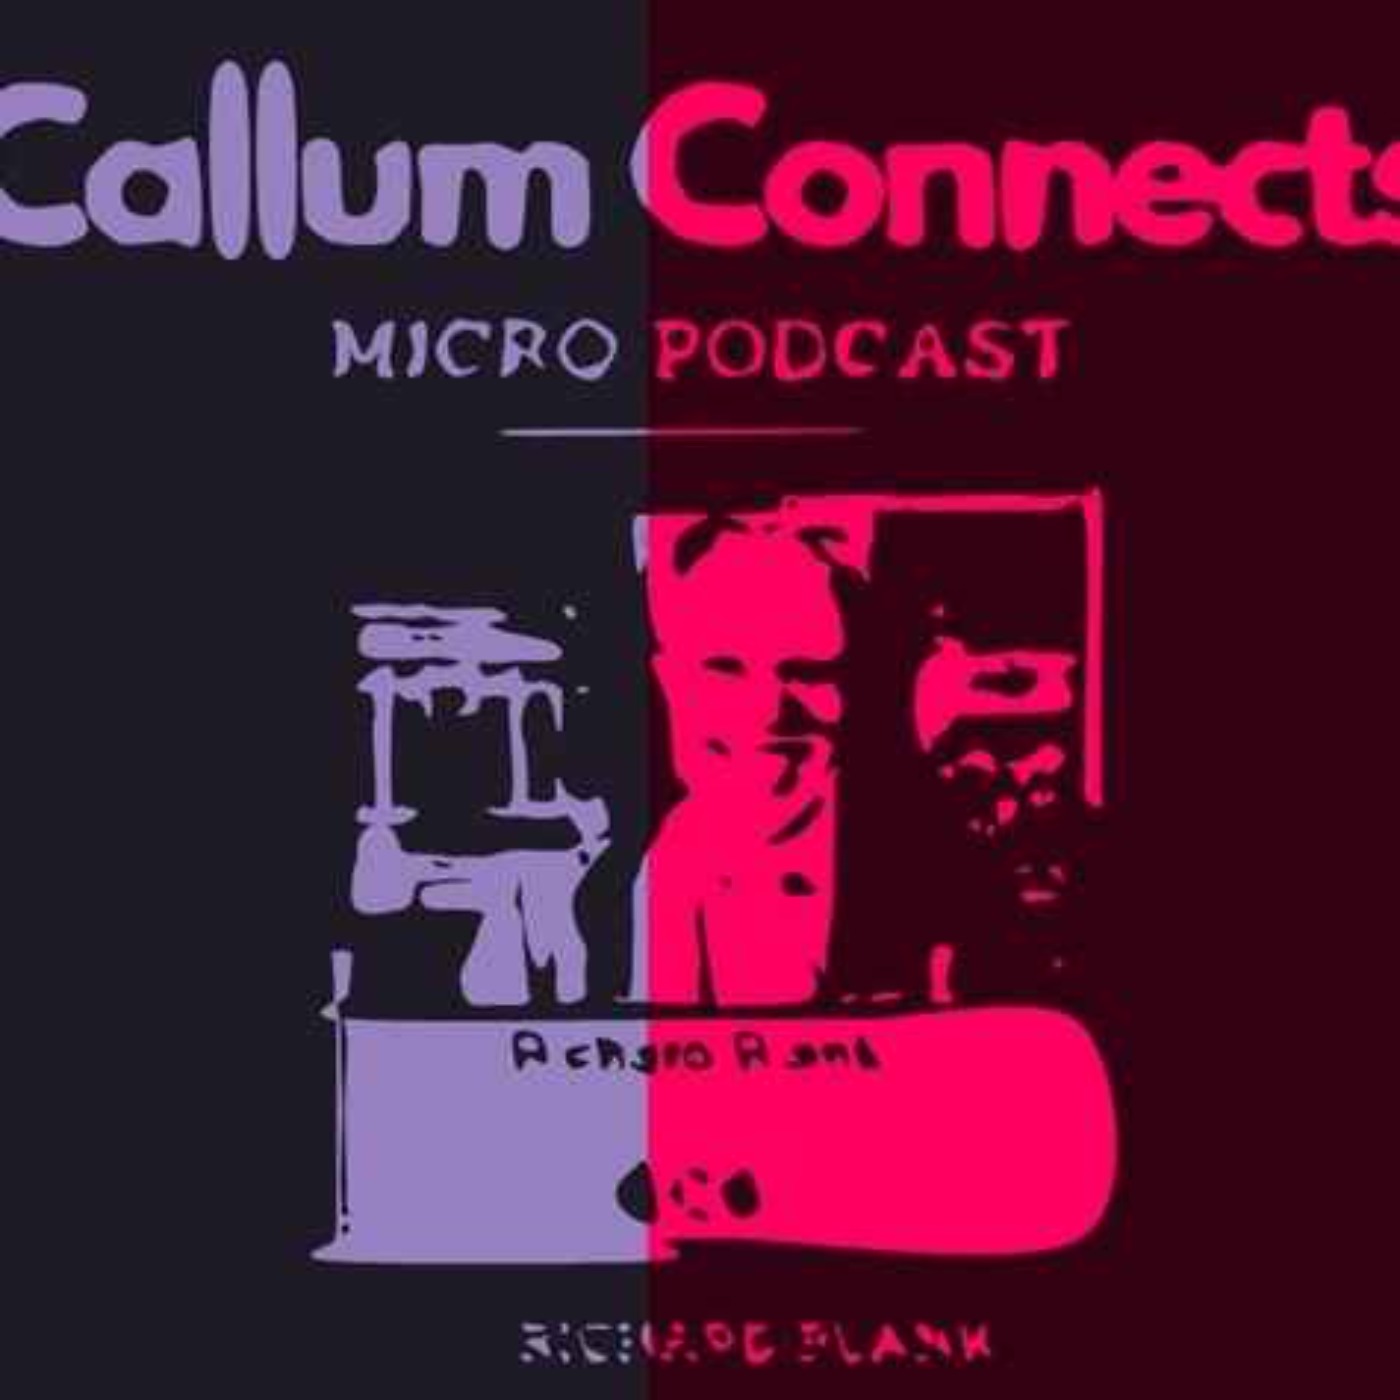 cover art for My biggest hurdle as an entrepreneur. Callum Connects Micro Podcast with a nearshore sales team CEO.